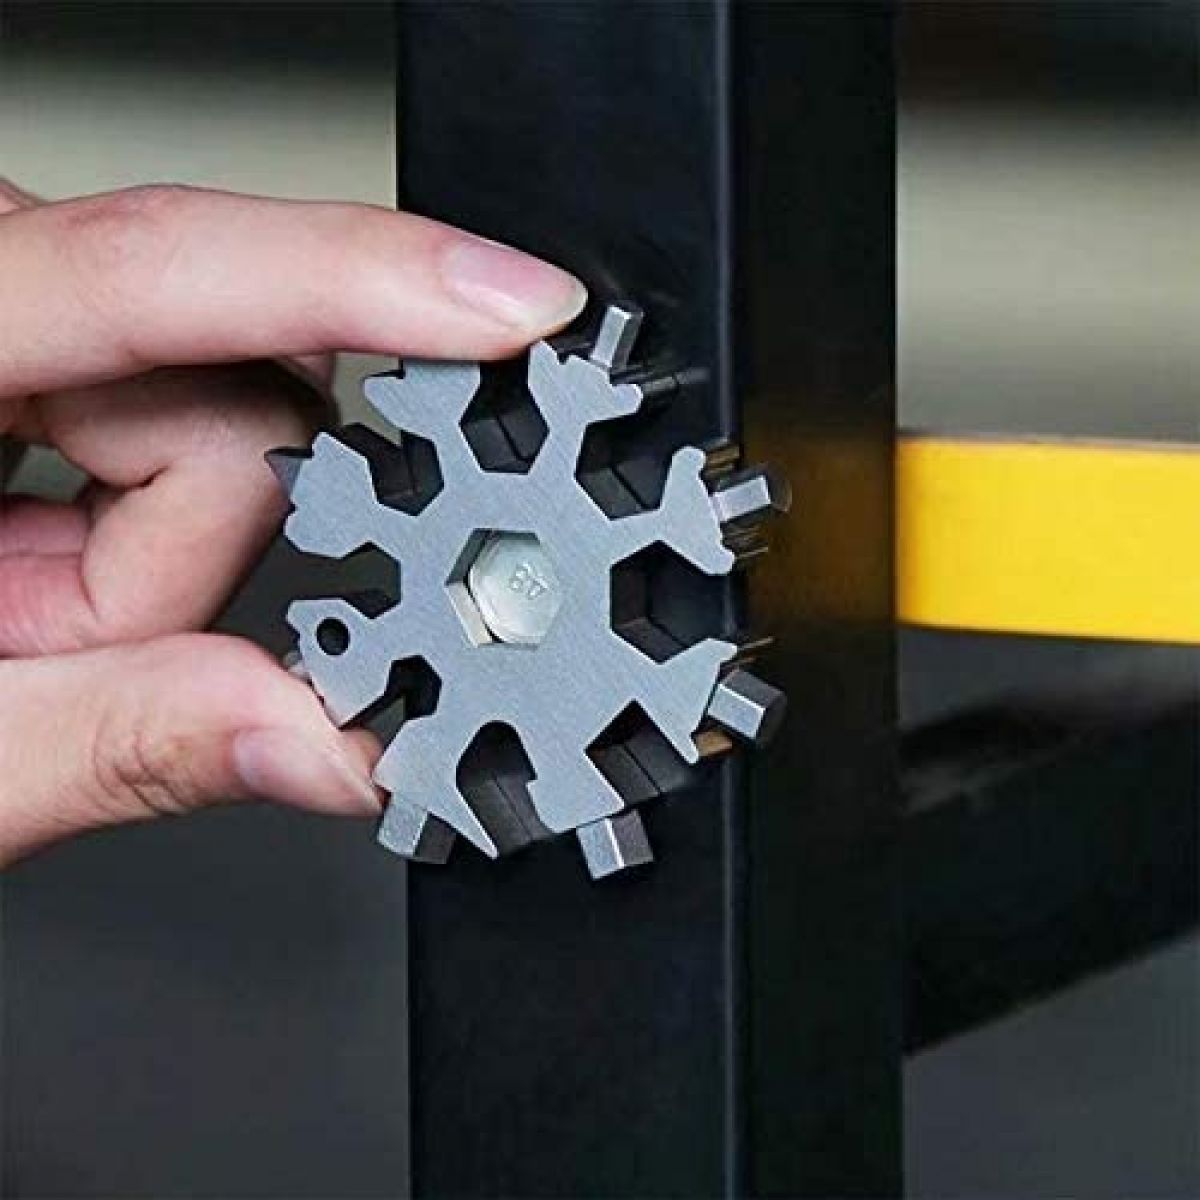 Multifunctional keychain "Snowflake" made of stainless steel